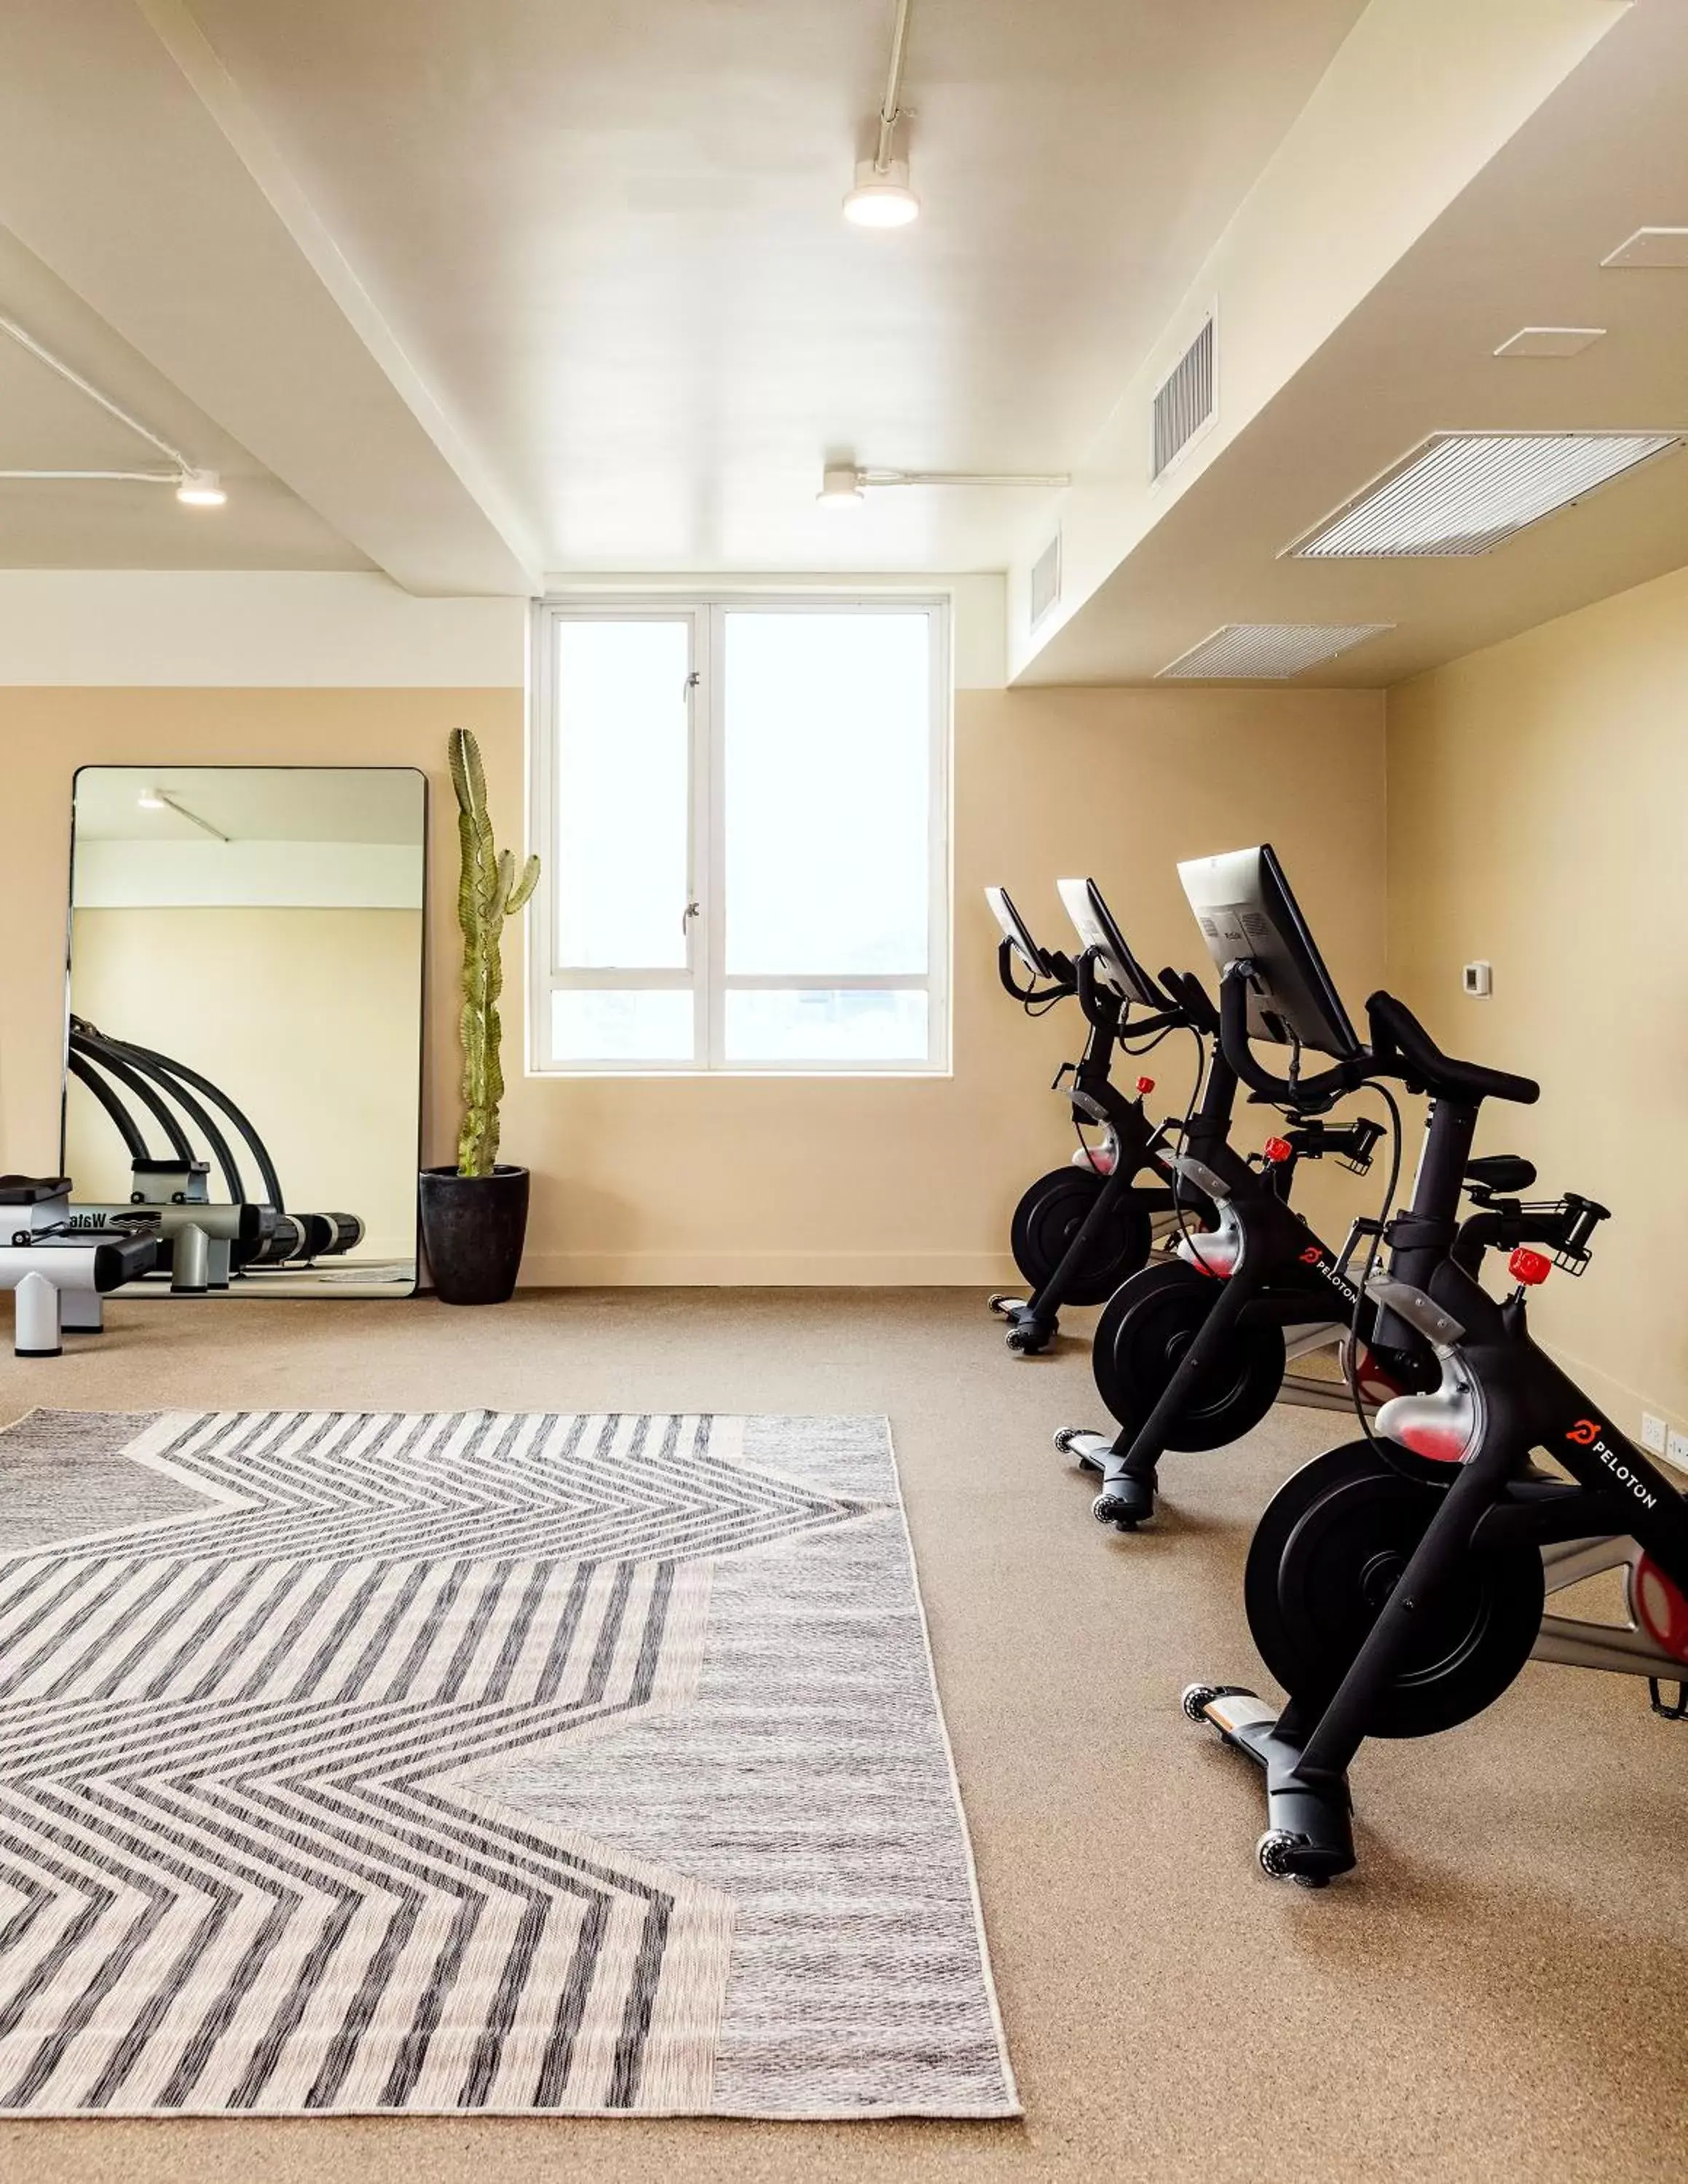 Fitness centre/facilities in Hotel June, Los Angeles, a Member of Design Hotels